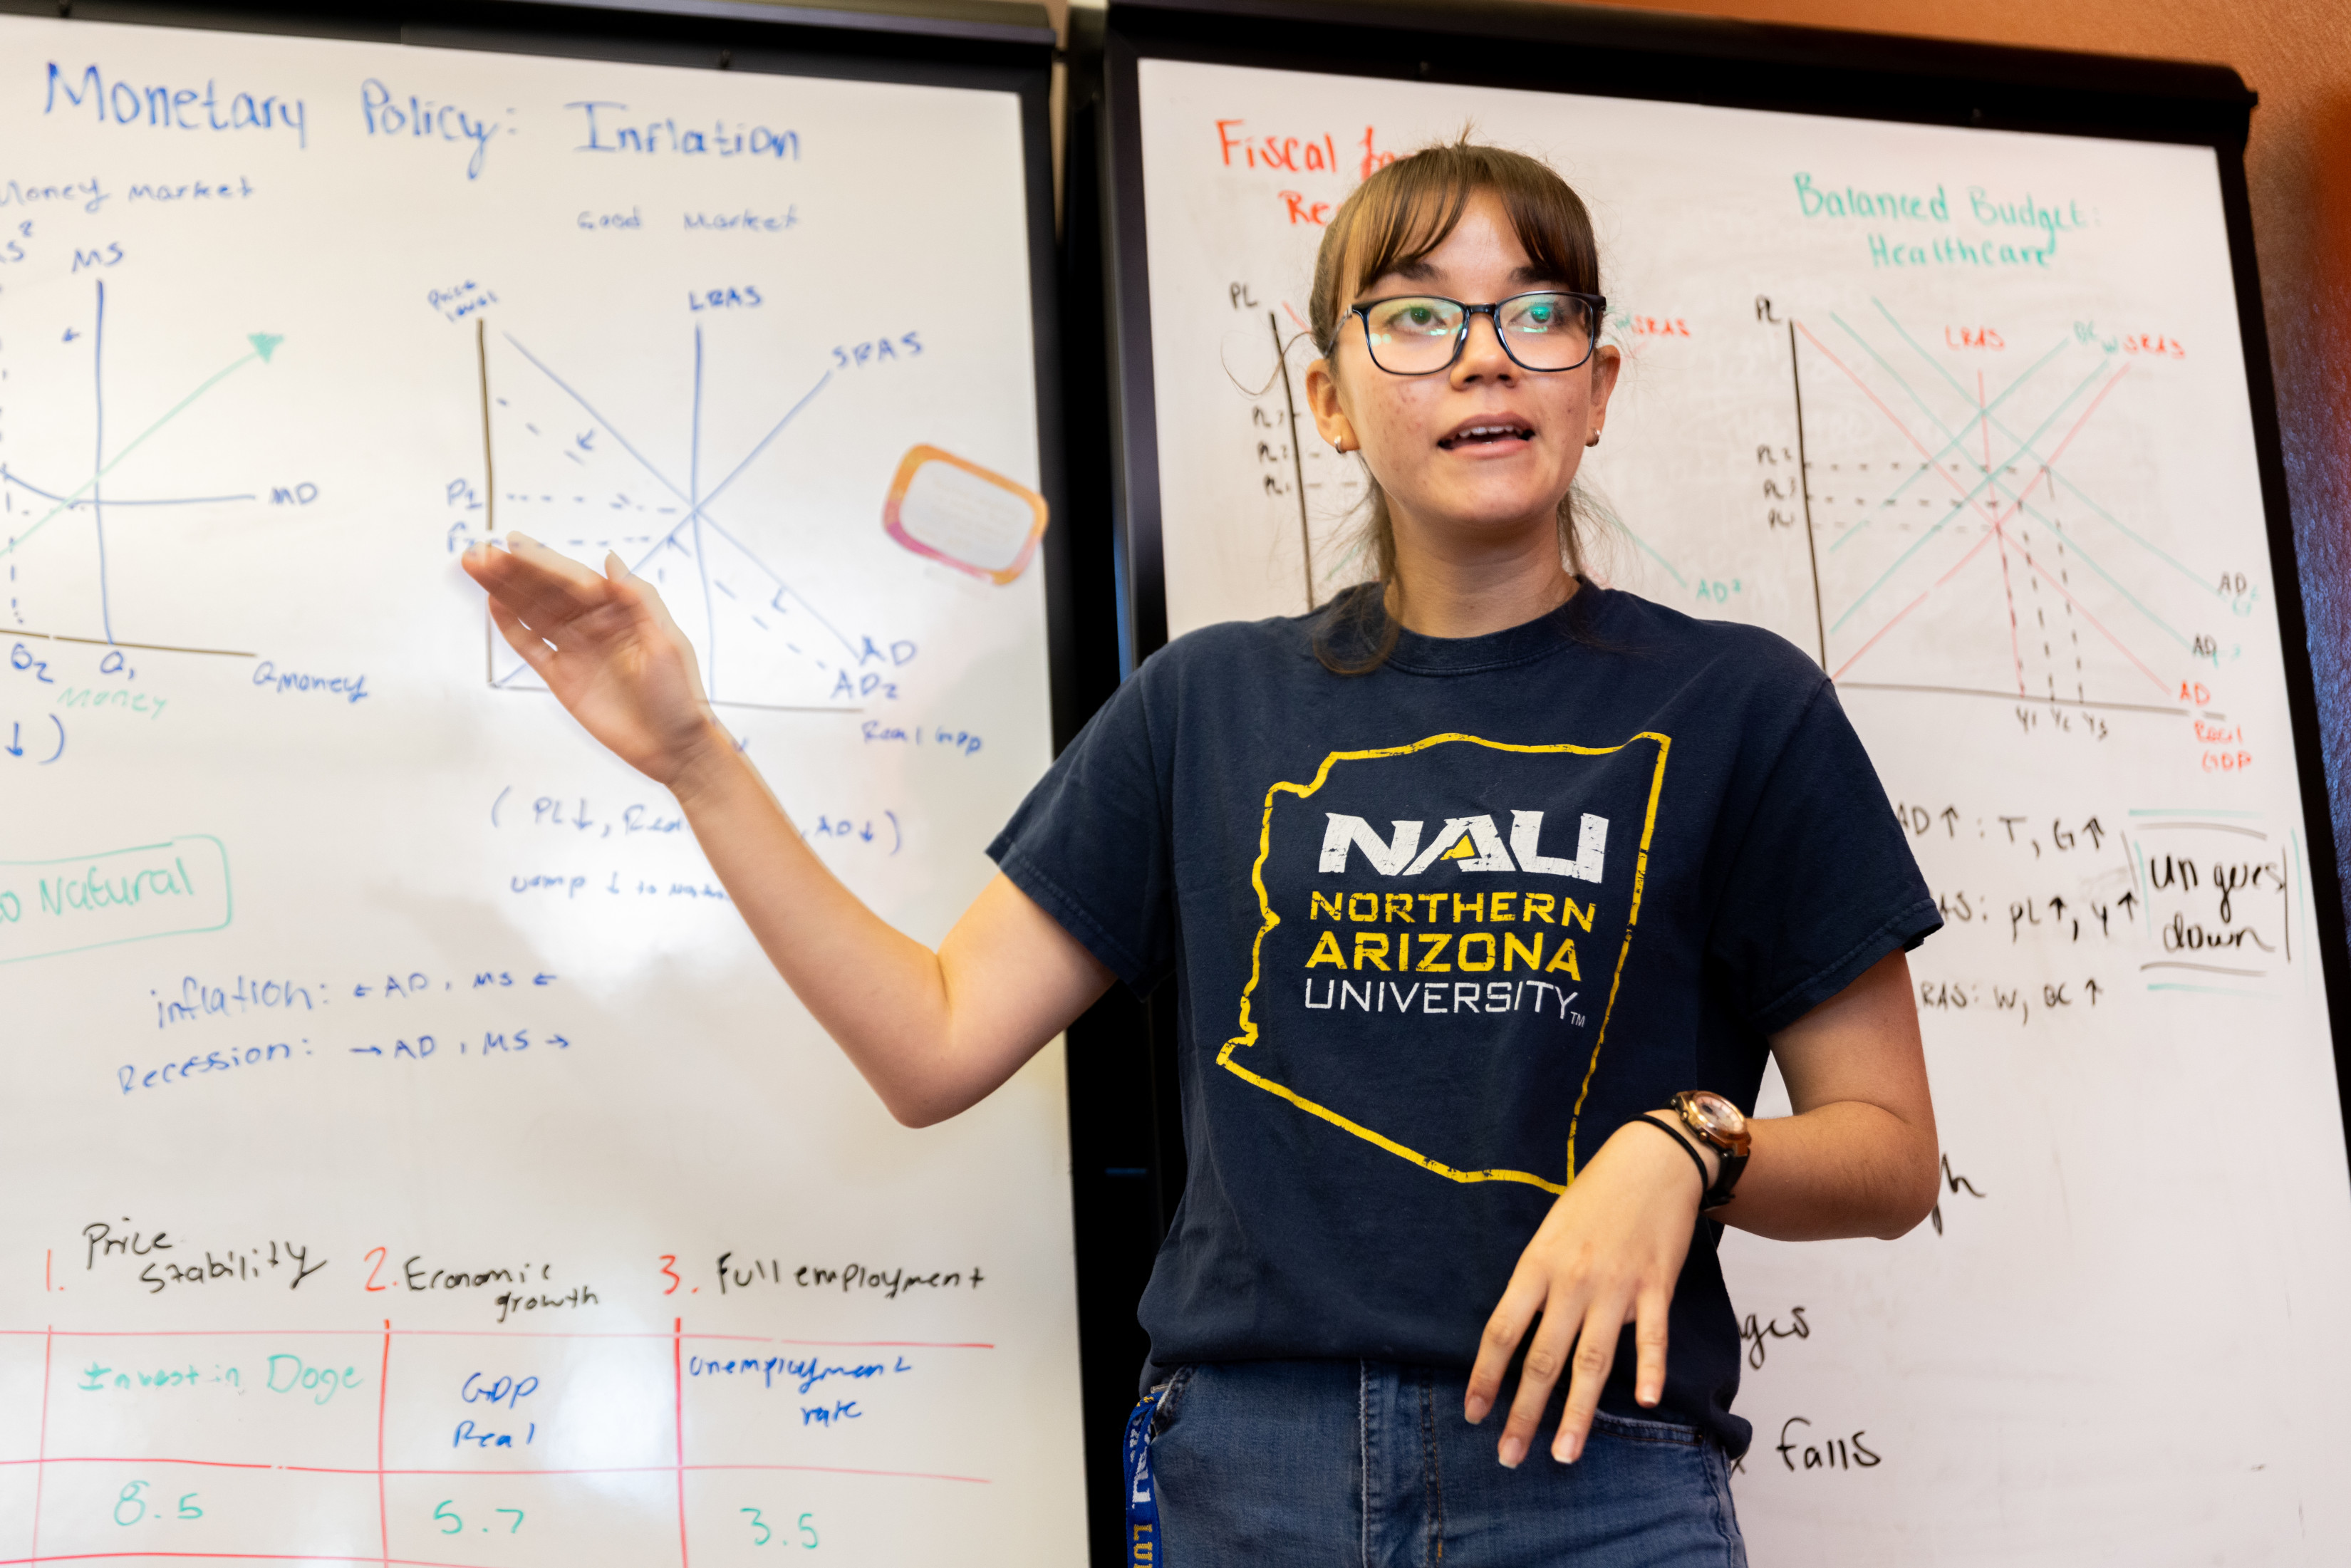 Student wearing 'Northern Arizona University' t-shirt, presenting in front of whiteboards showing complex graphs.